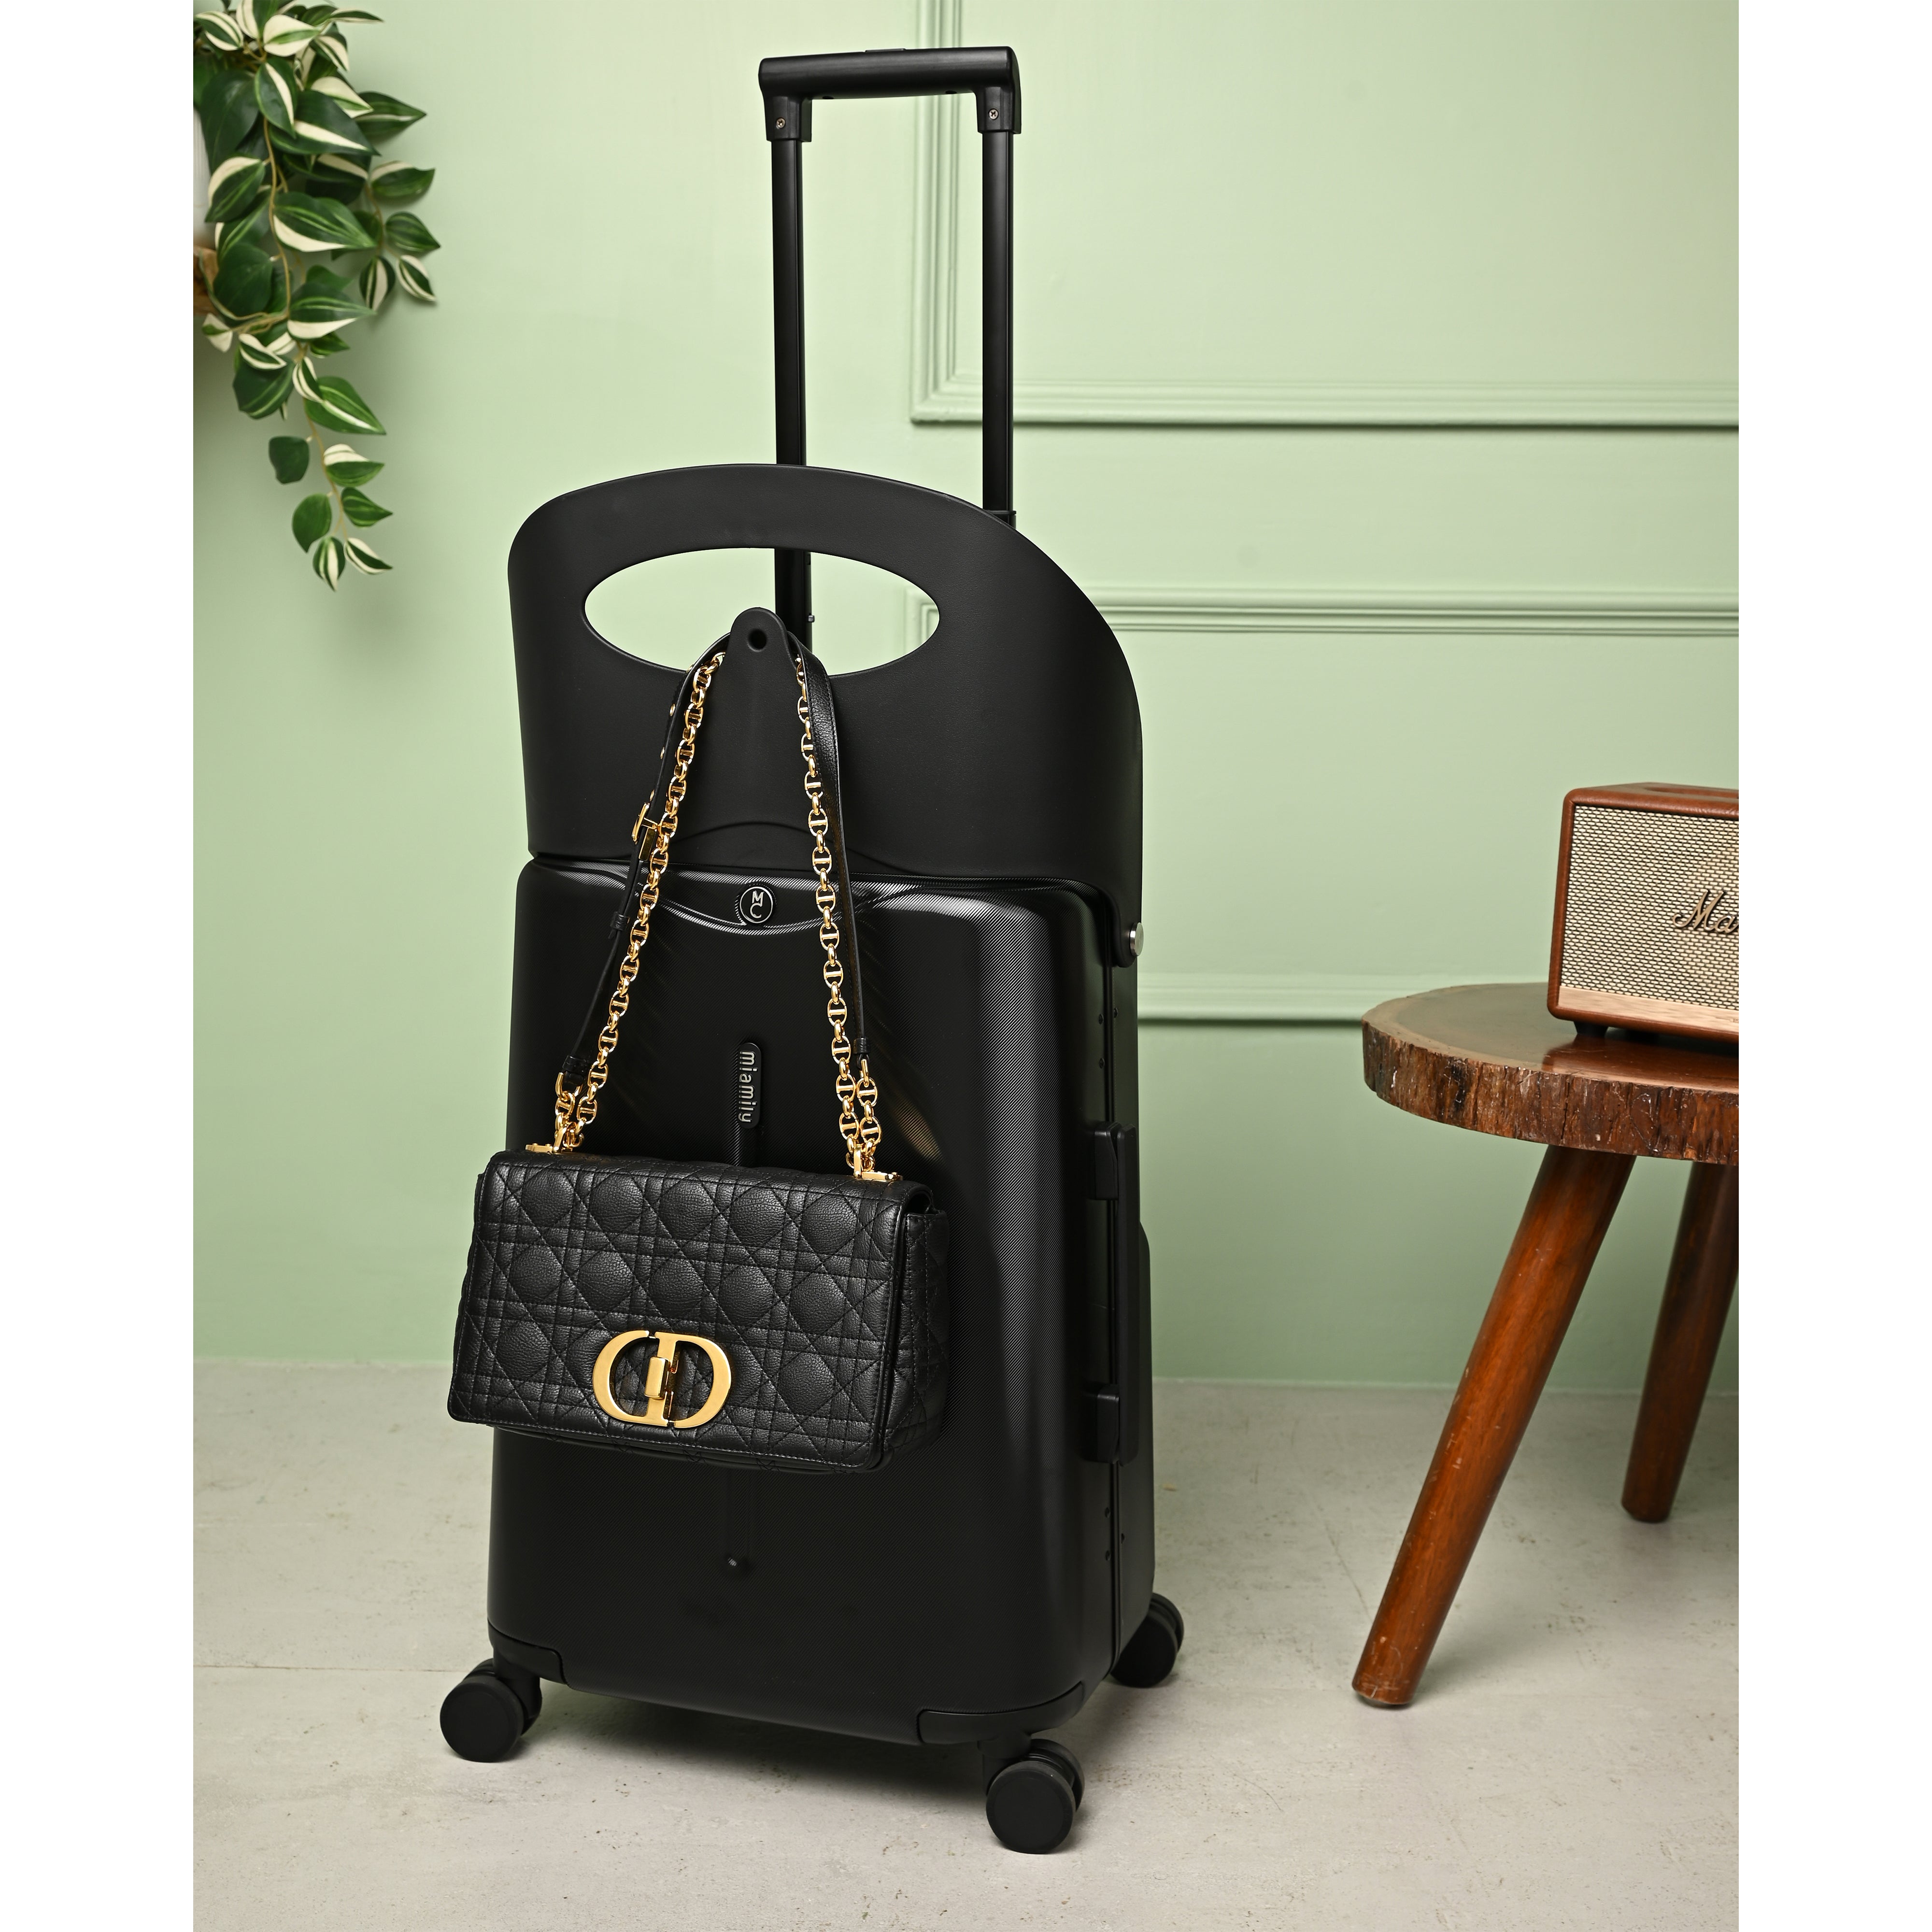 Miamily Midnight Black Ride-On Trolley Carry-On Luggage 18 inches